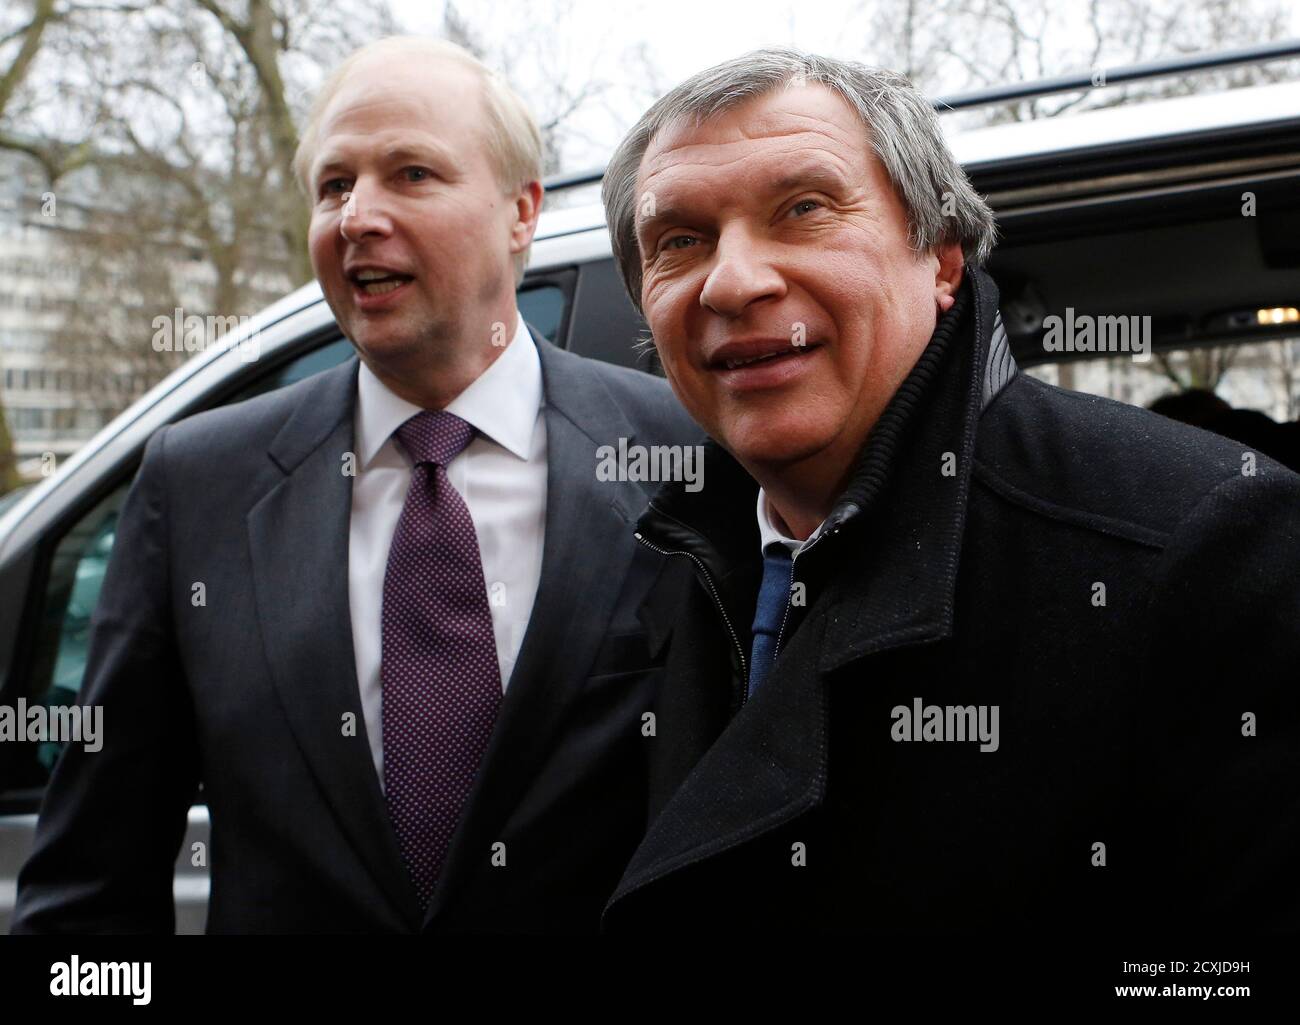 British Petroleum CEO Bob Dudley (L) and Rosneft CEO Igor Sechin (R) arrive outside the BP headquarters in central London March 21, 2013. Russian state oil company Rosneft closed its deal to buy TNK-BP from UK-based BP and four tycoons on Thursday, releasing $40 billion cash to the sellers and becoming a bigger oil producer than Exxon Mobil. The $55 billion deal, which also gives BP a near 20 percent stake in Rosneft, was announced last year after months of on-off negotiations. It is the biggest in Russia's corporate history.. REUTERS/Olivia Harris (BRITAIN - Tags: BUSINESS POLITICS ENERGY) Stock Photo